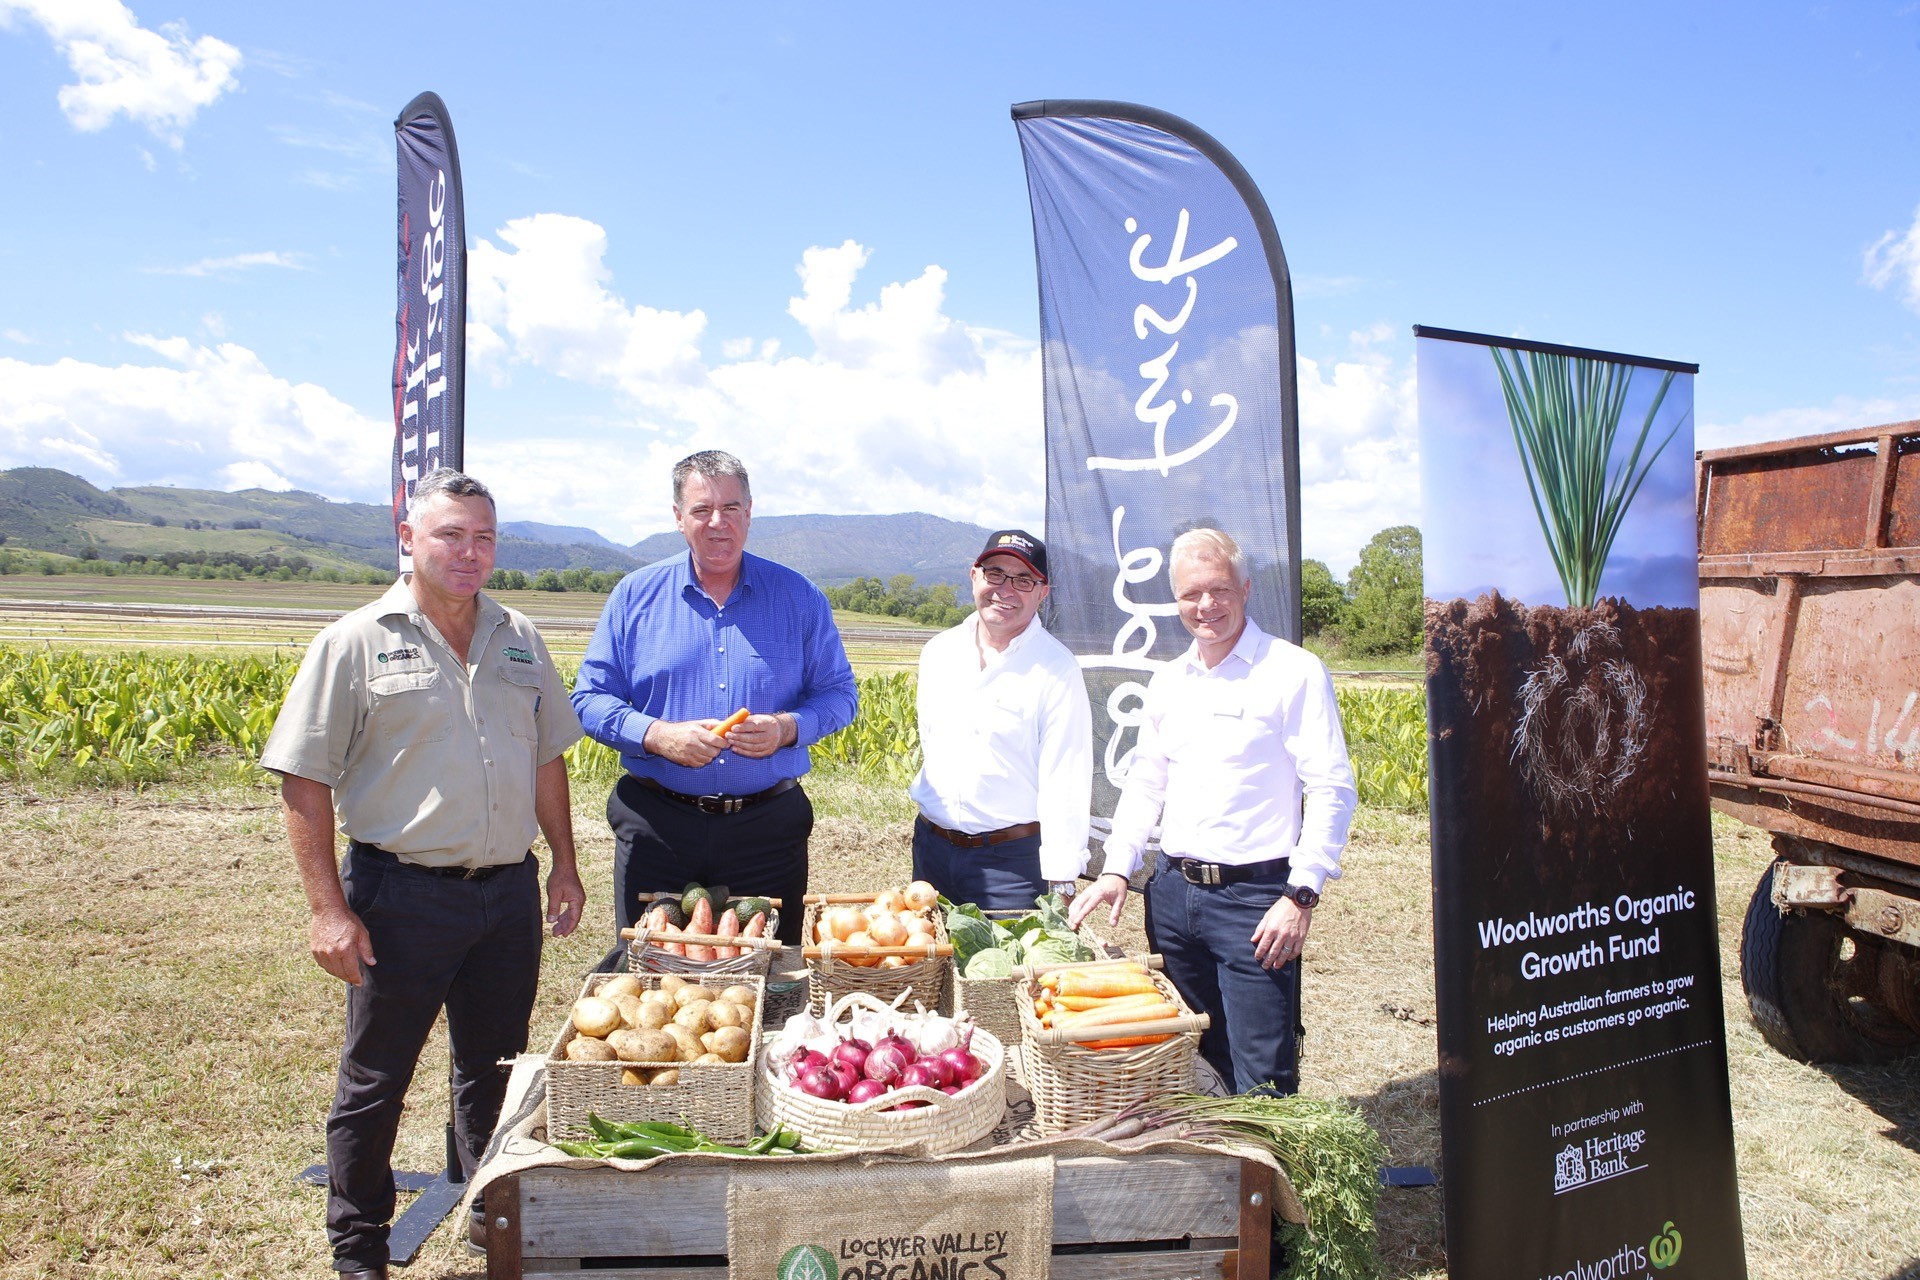 CAPTION: Launching the Woolworths Organic Growth Fund are (from left) Lockyer Valley Organics director Anthony Bauer, Queensland Minister for Agricultural Industry Development and Fisheries Mark Furner MP, Heritage Bank CEO Peter Lock and Woolworths Head of Produce Paul Turner. 